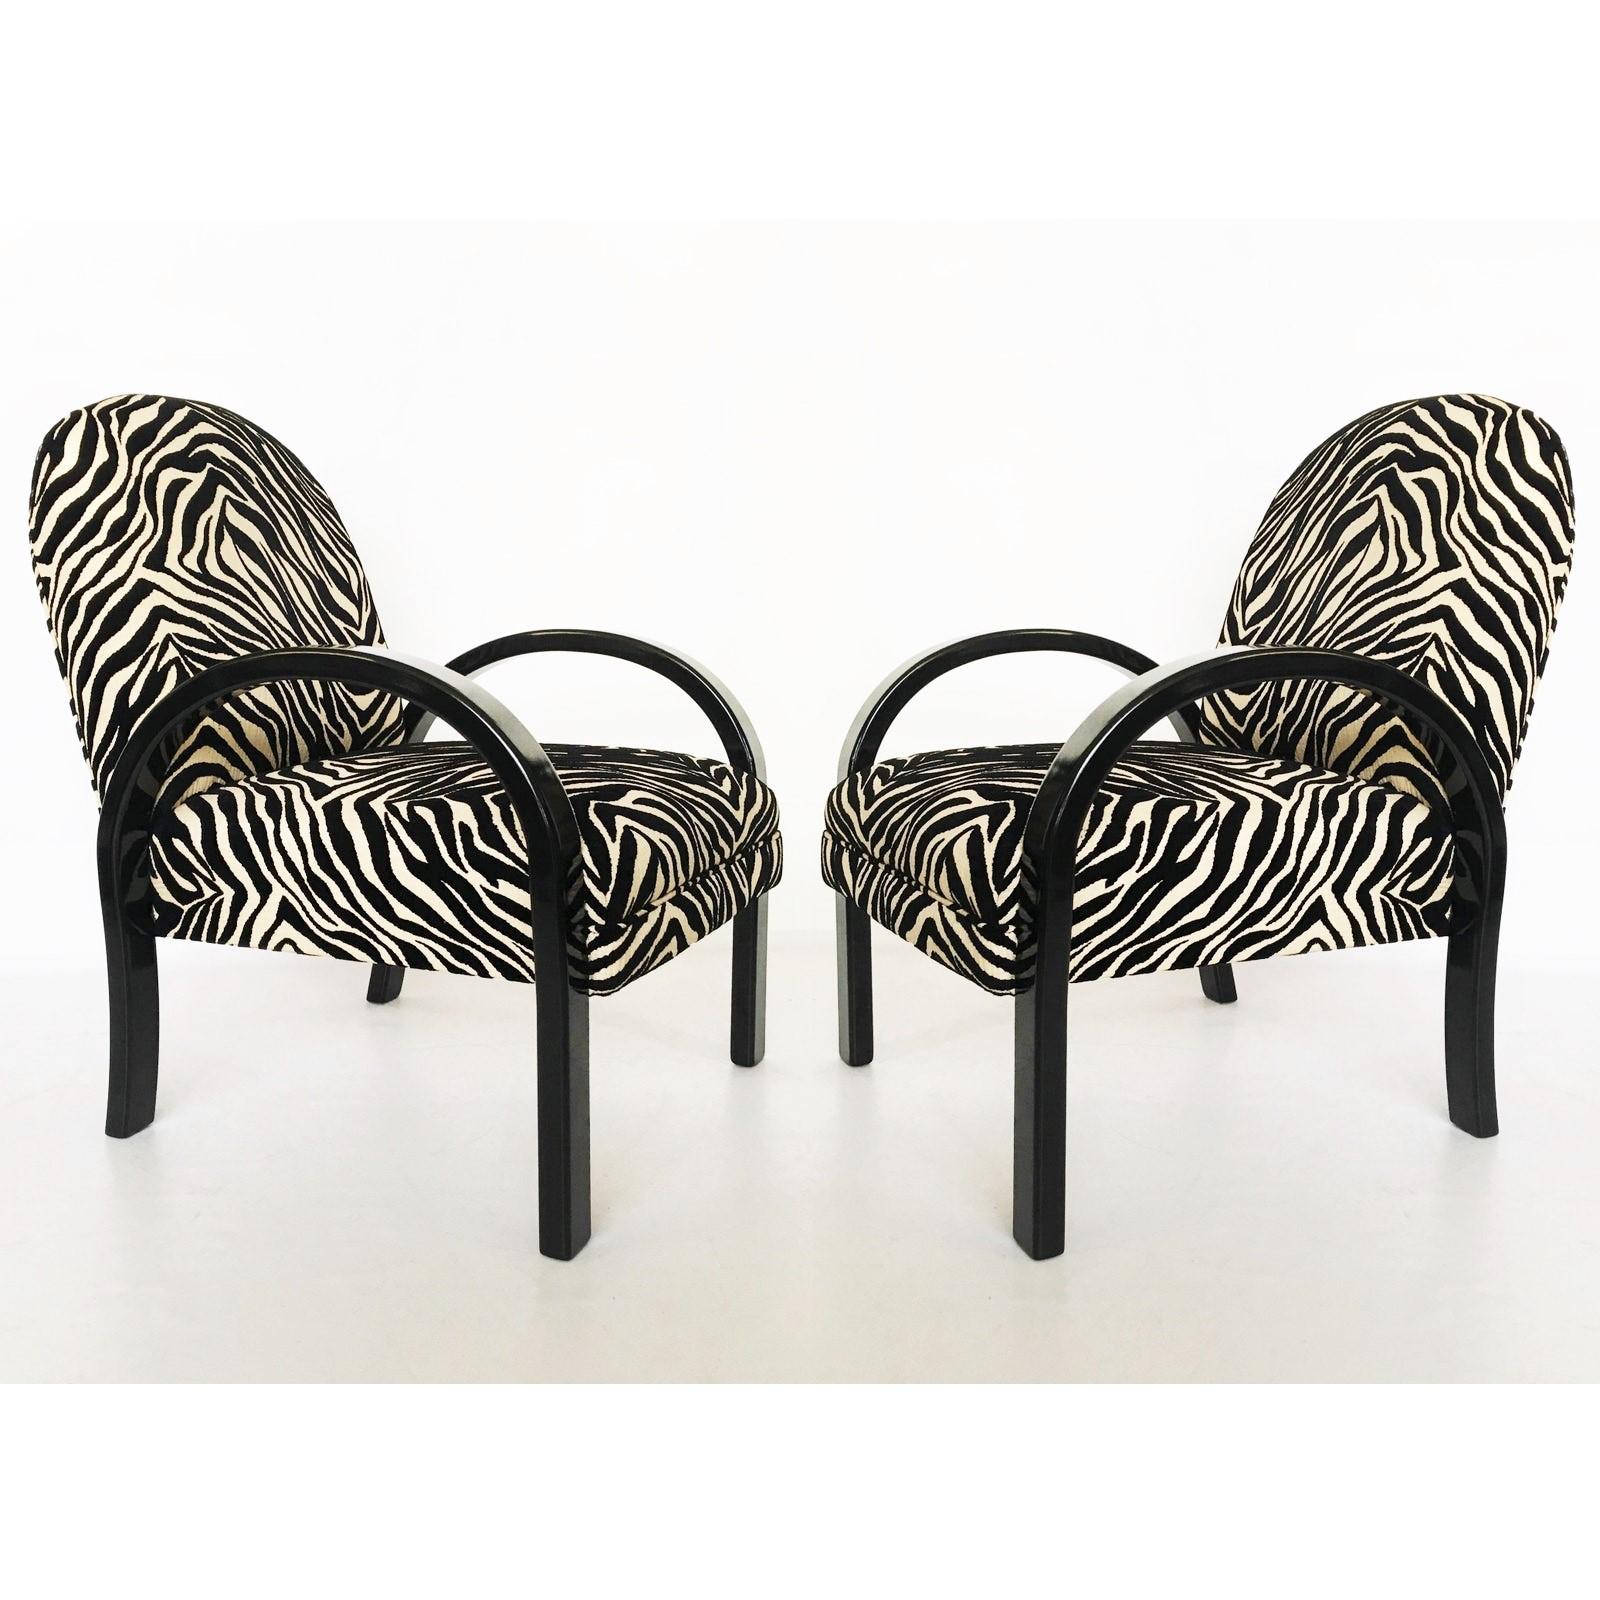 Beautifully figured pair of Art Deco easy chairs in the style of Jindrich Halabala. The construction of the frame and the seemingly floating upholstered seats give the chairs a sculptural presence. Features a black lacquered wood frames, richly